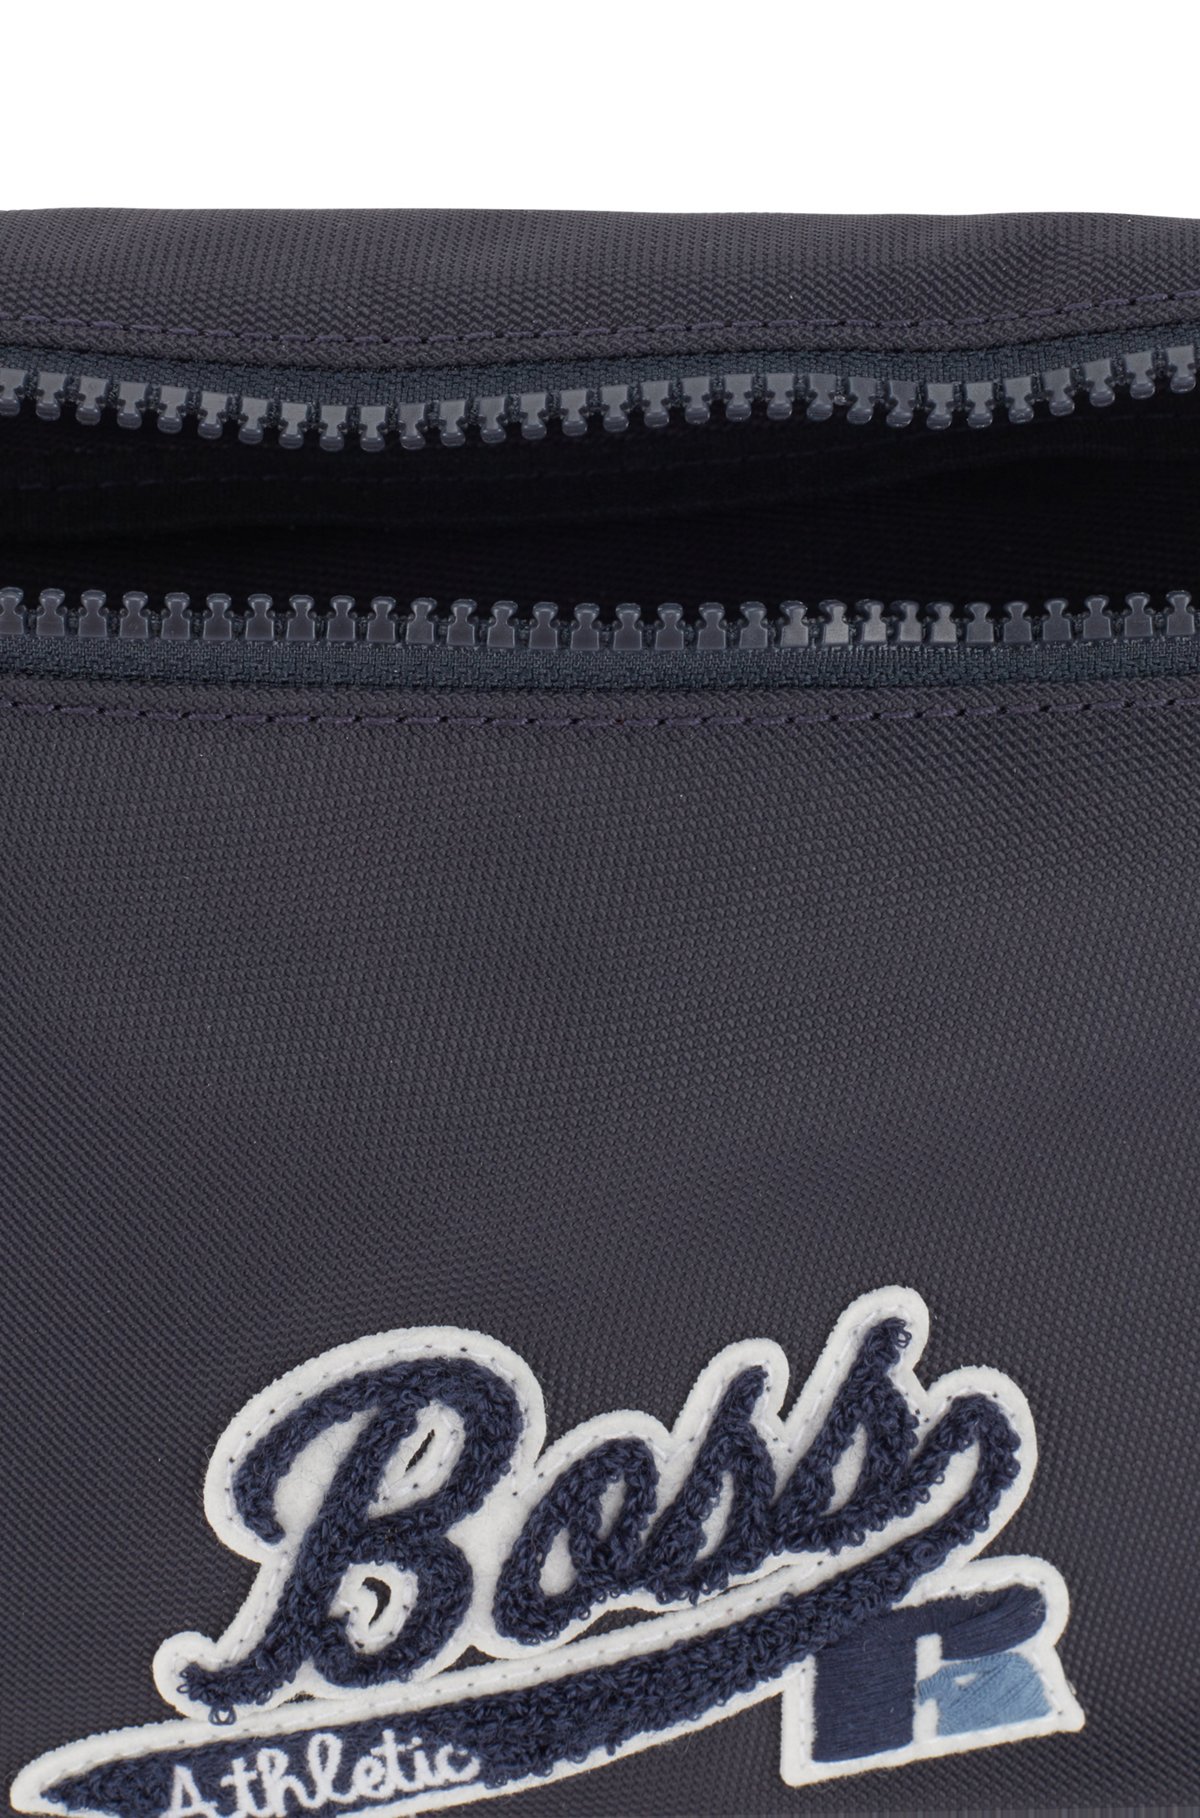 Belt bag in recycled nylon with exclusive logo, Dark Blue